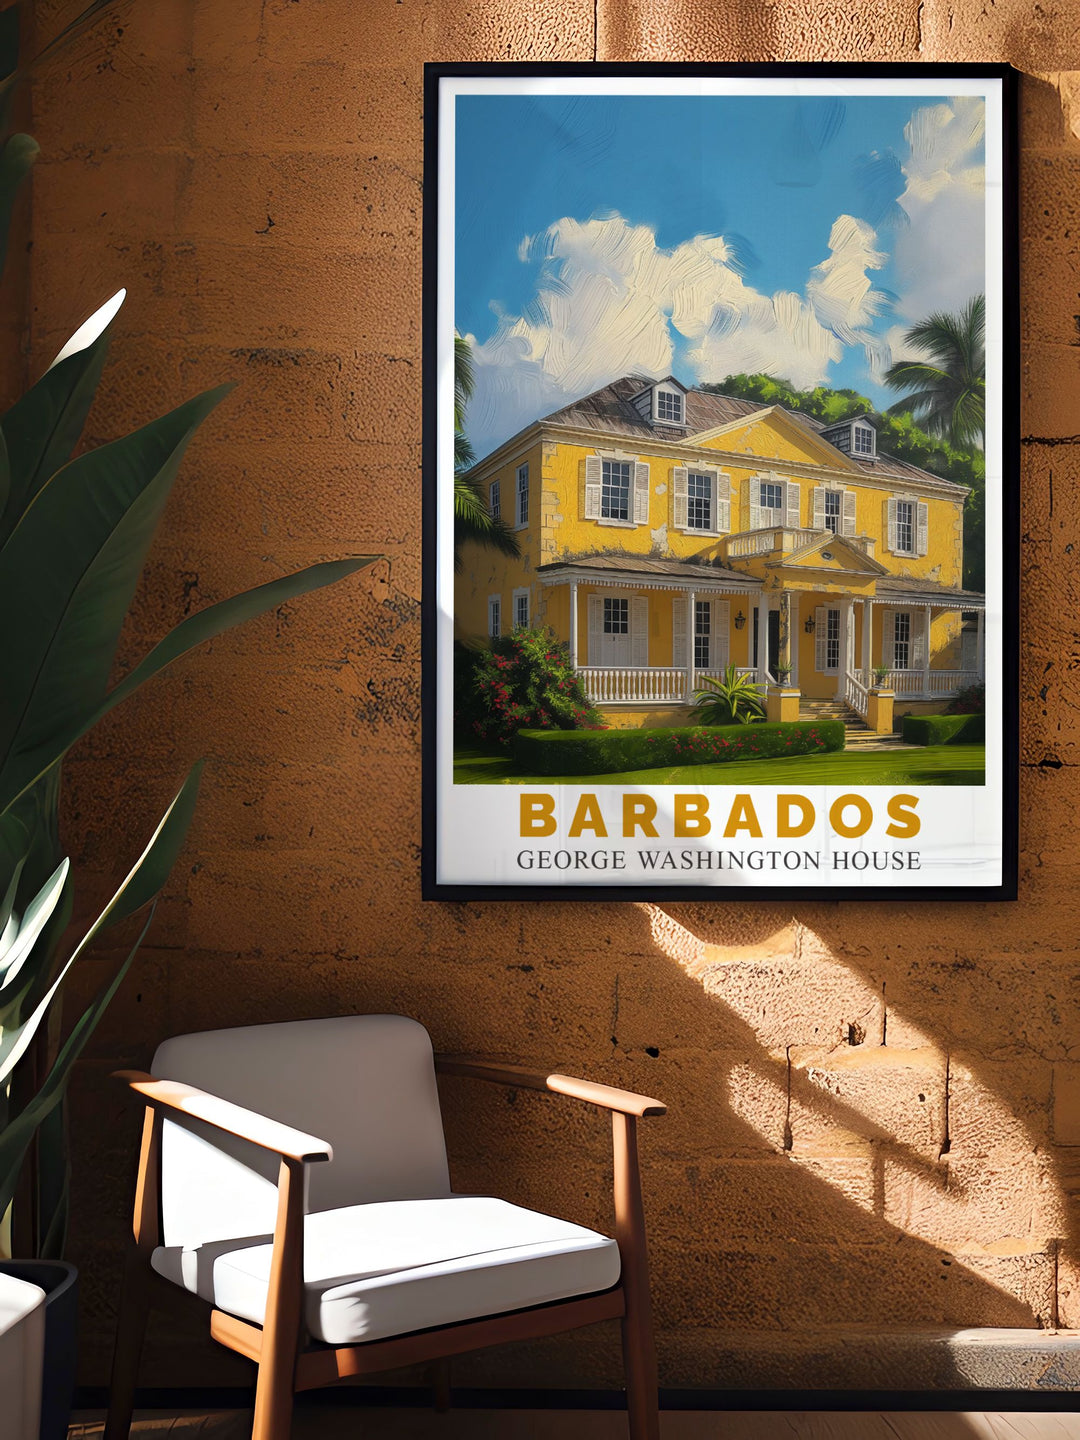 High quality Barbados art print showcasing the lush landscapes and historic landmarks of the island, from its turquoise waters to its Georgian architecture, providing a visual journey through the tropical paradise of the Caribbean.